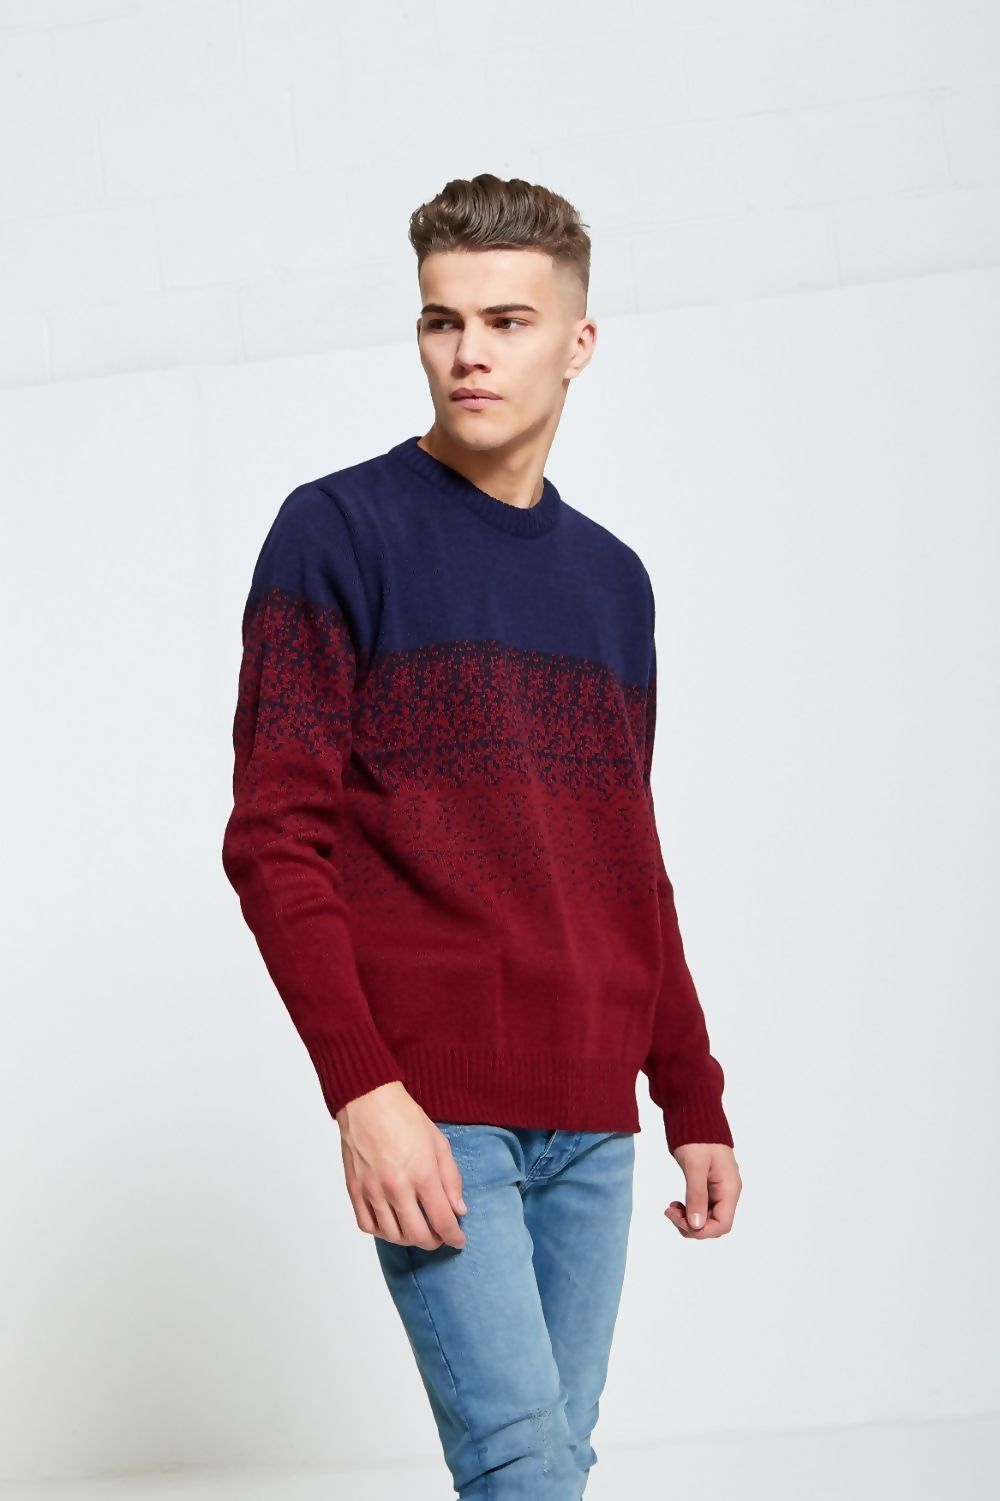 BLUE AND WINE TWO-TONE KNITTED JUMPER - MSFMART UK